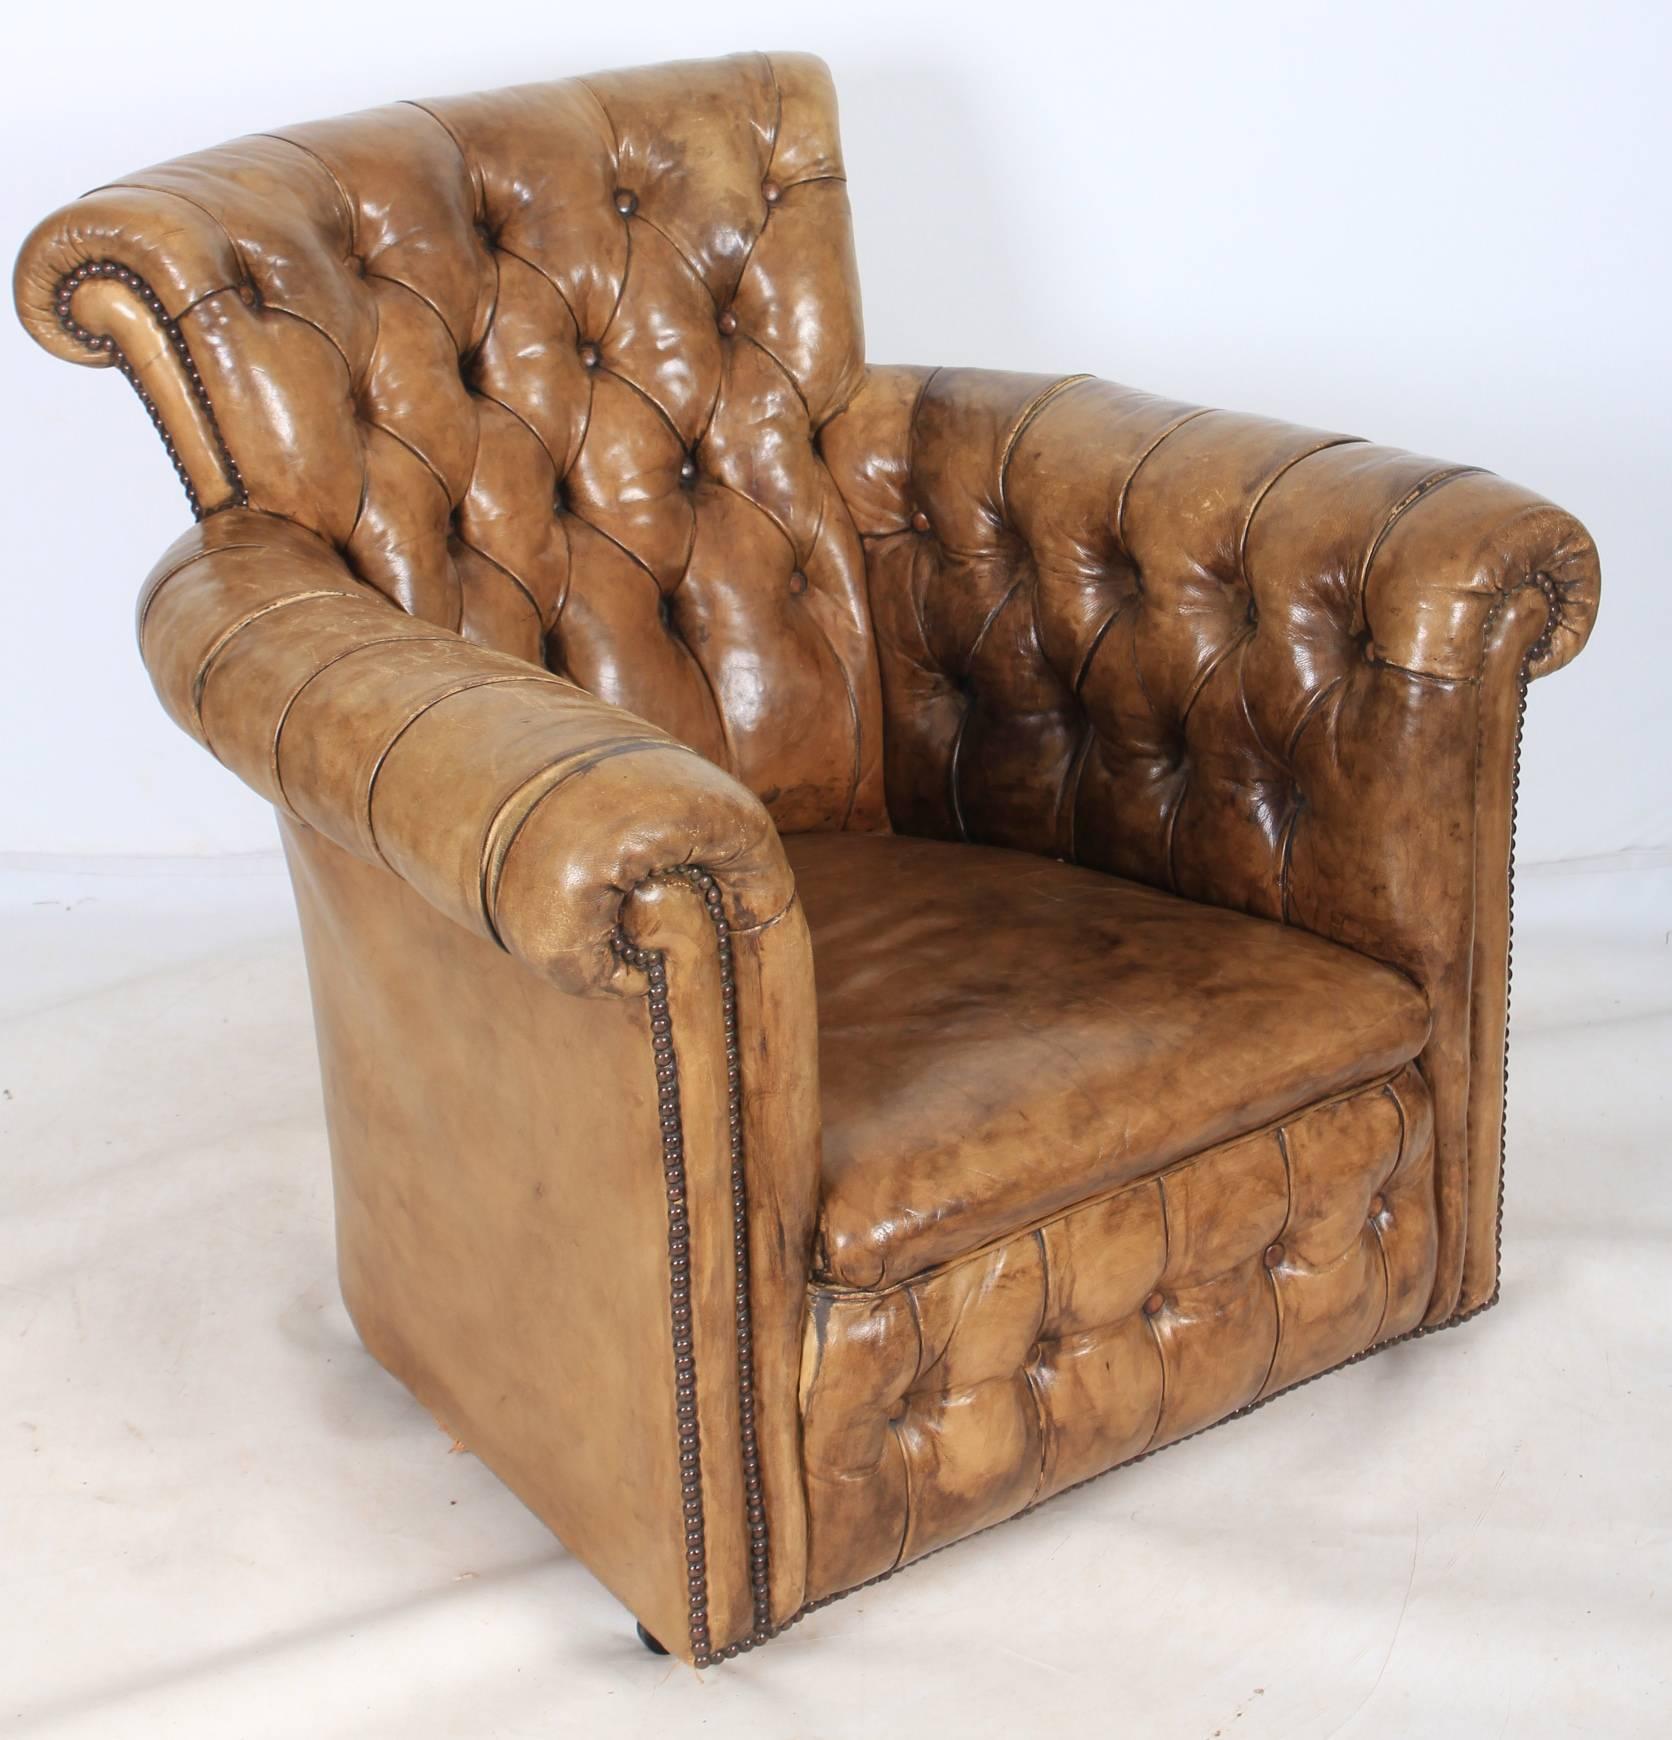 English, circa 1920.
A lovely Chesterfield armchair, upholstered in a green/tan leather.
With beautiful buttoned backrest and arms.
On casters.